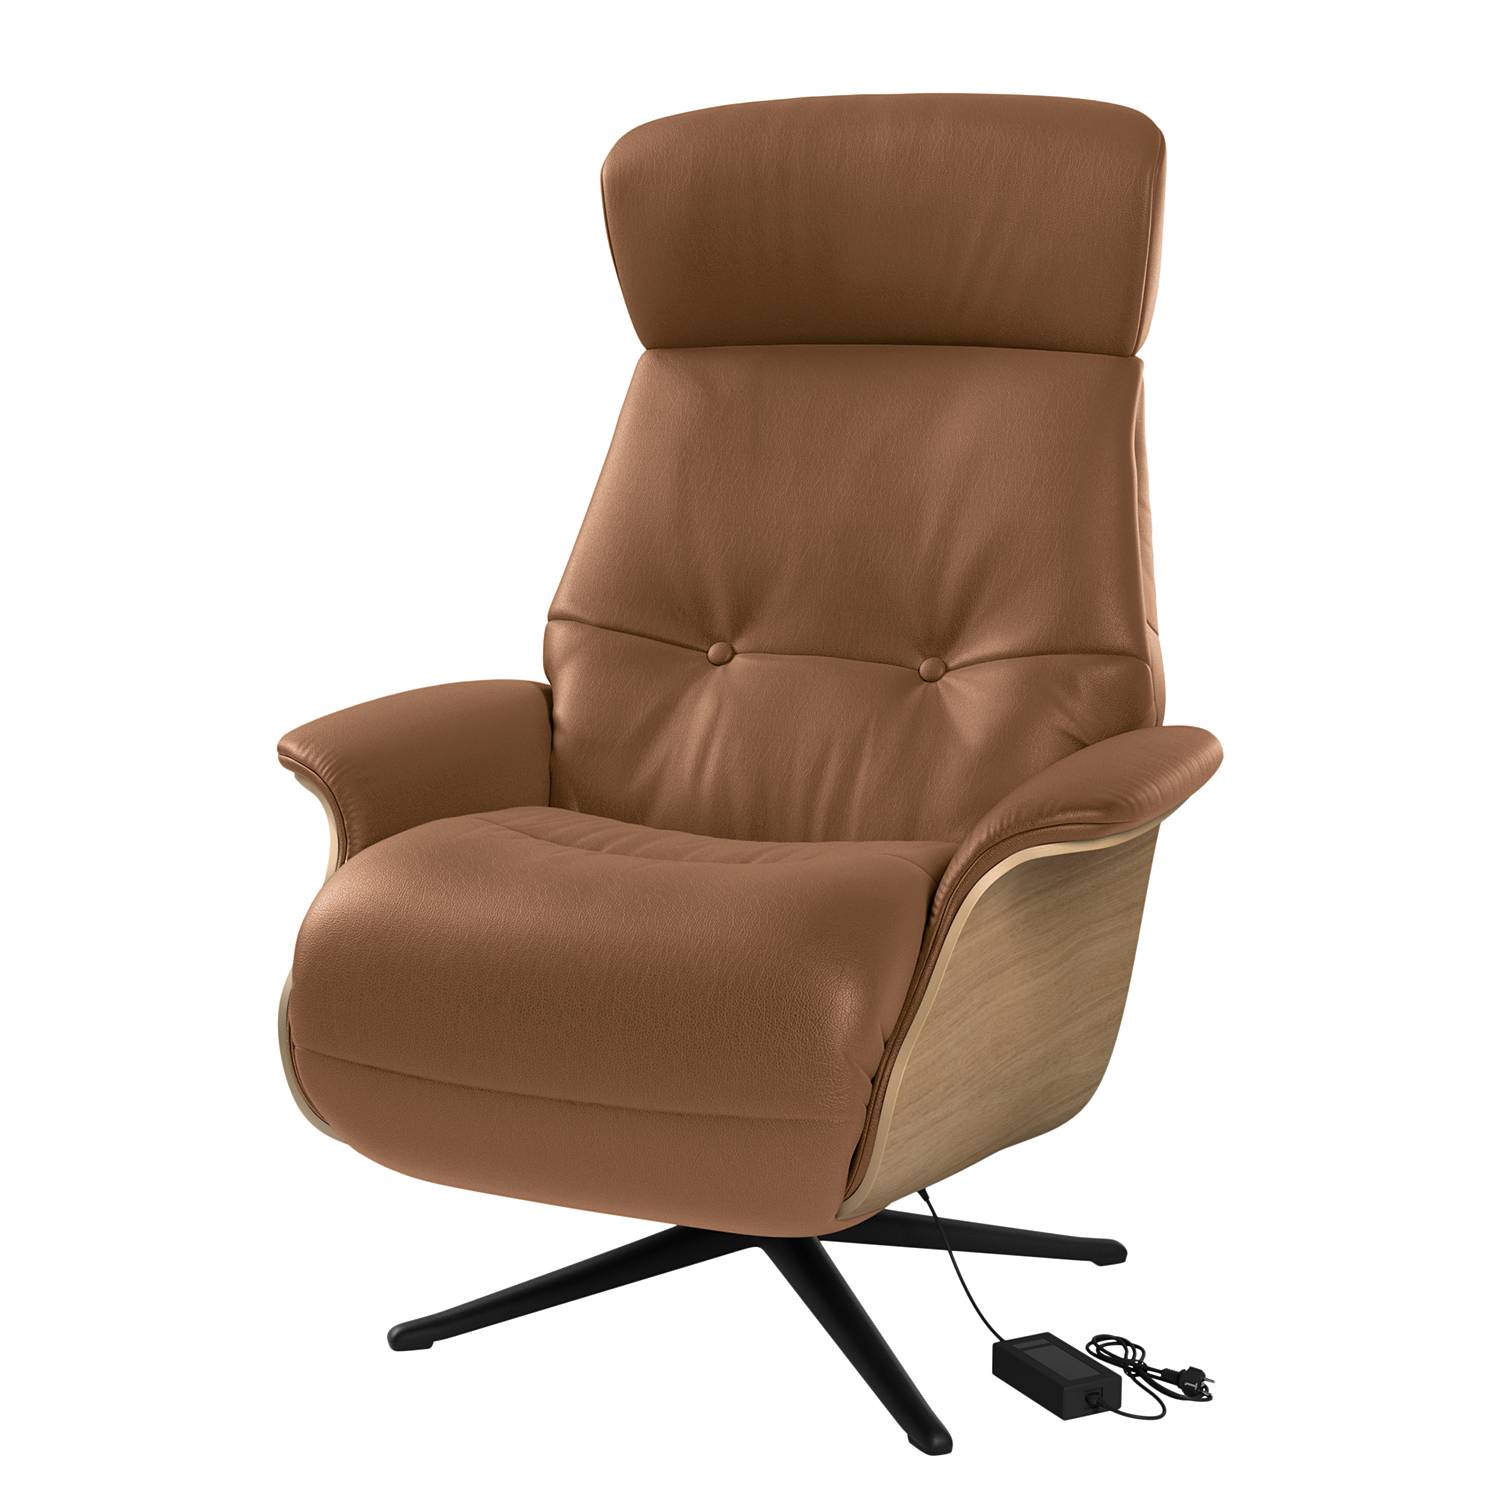 Image of Fauteuil relax Anderson VI 000000001000131459